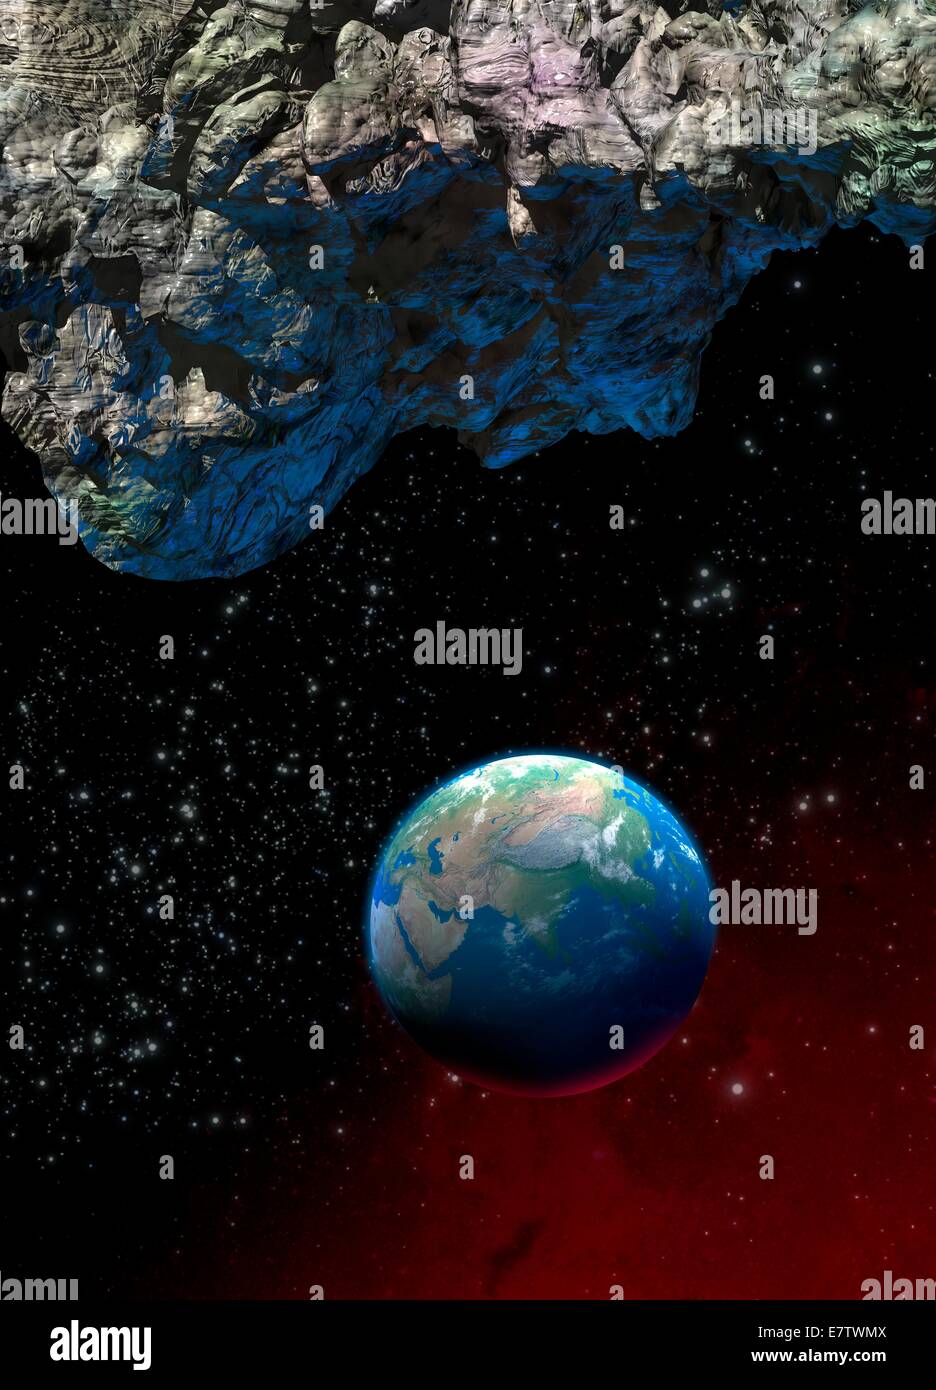 Asteroid and planet earth, computer artwork. Stock Photo